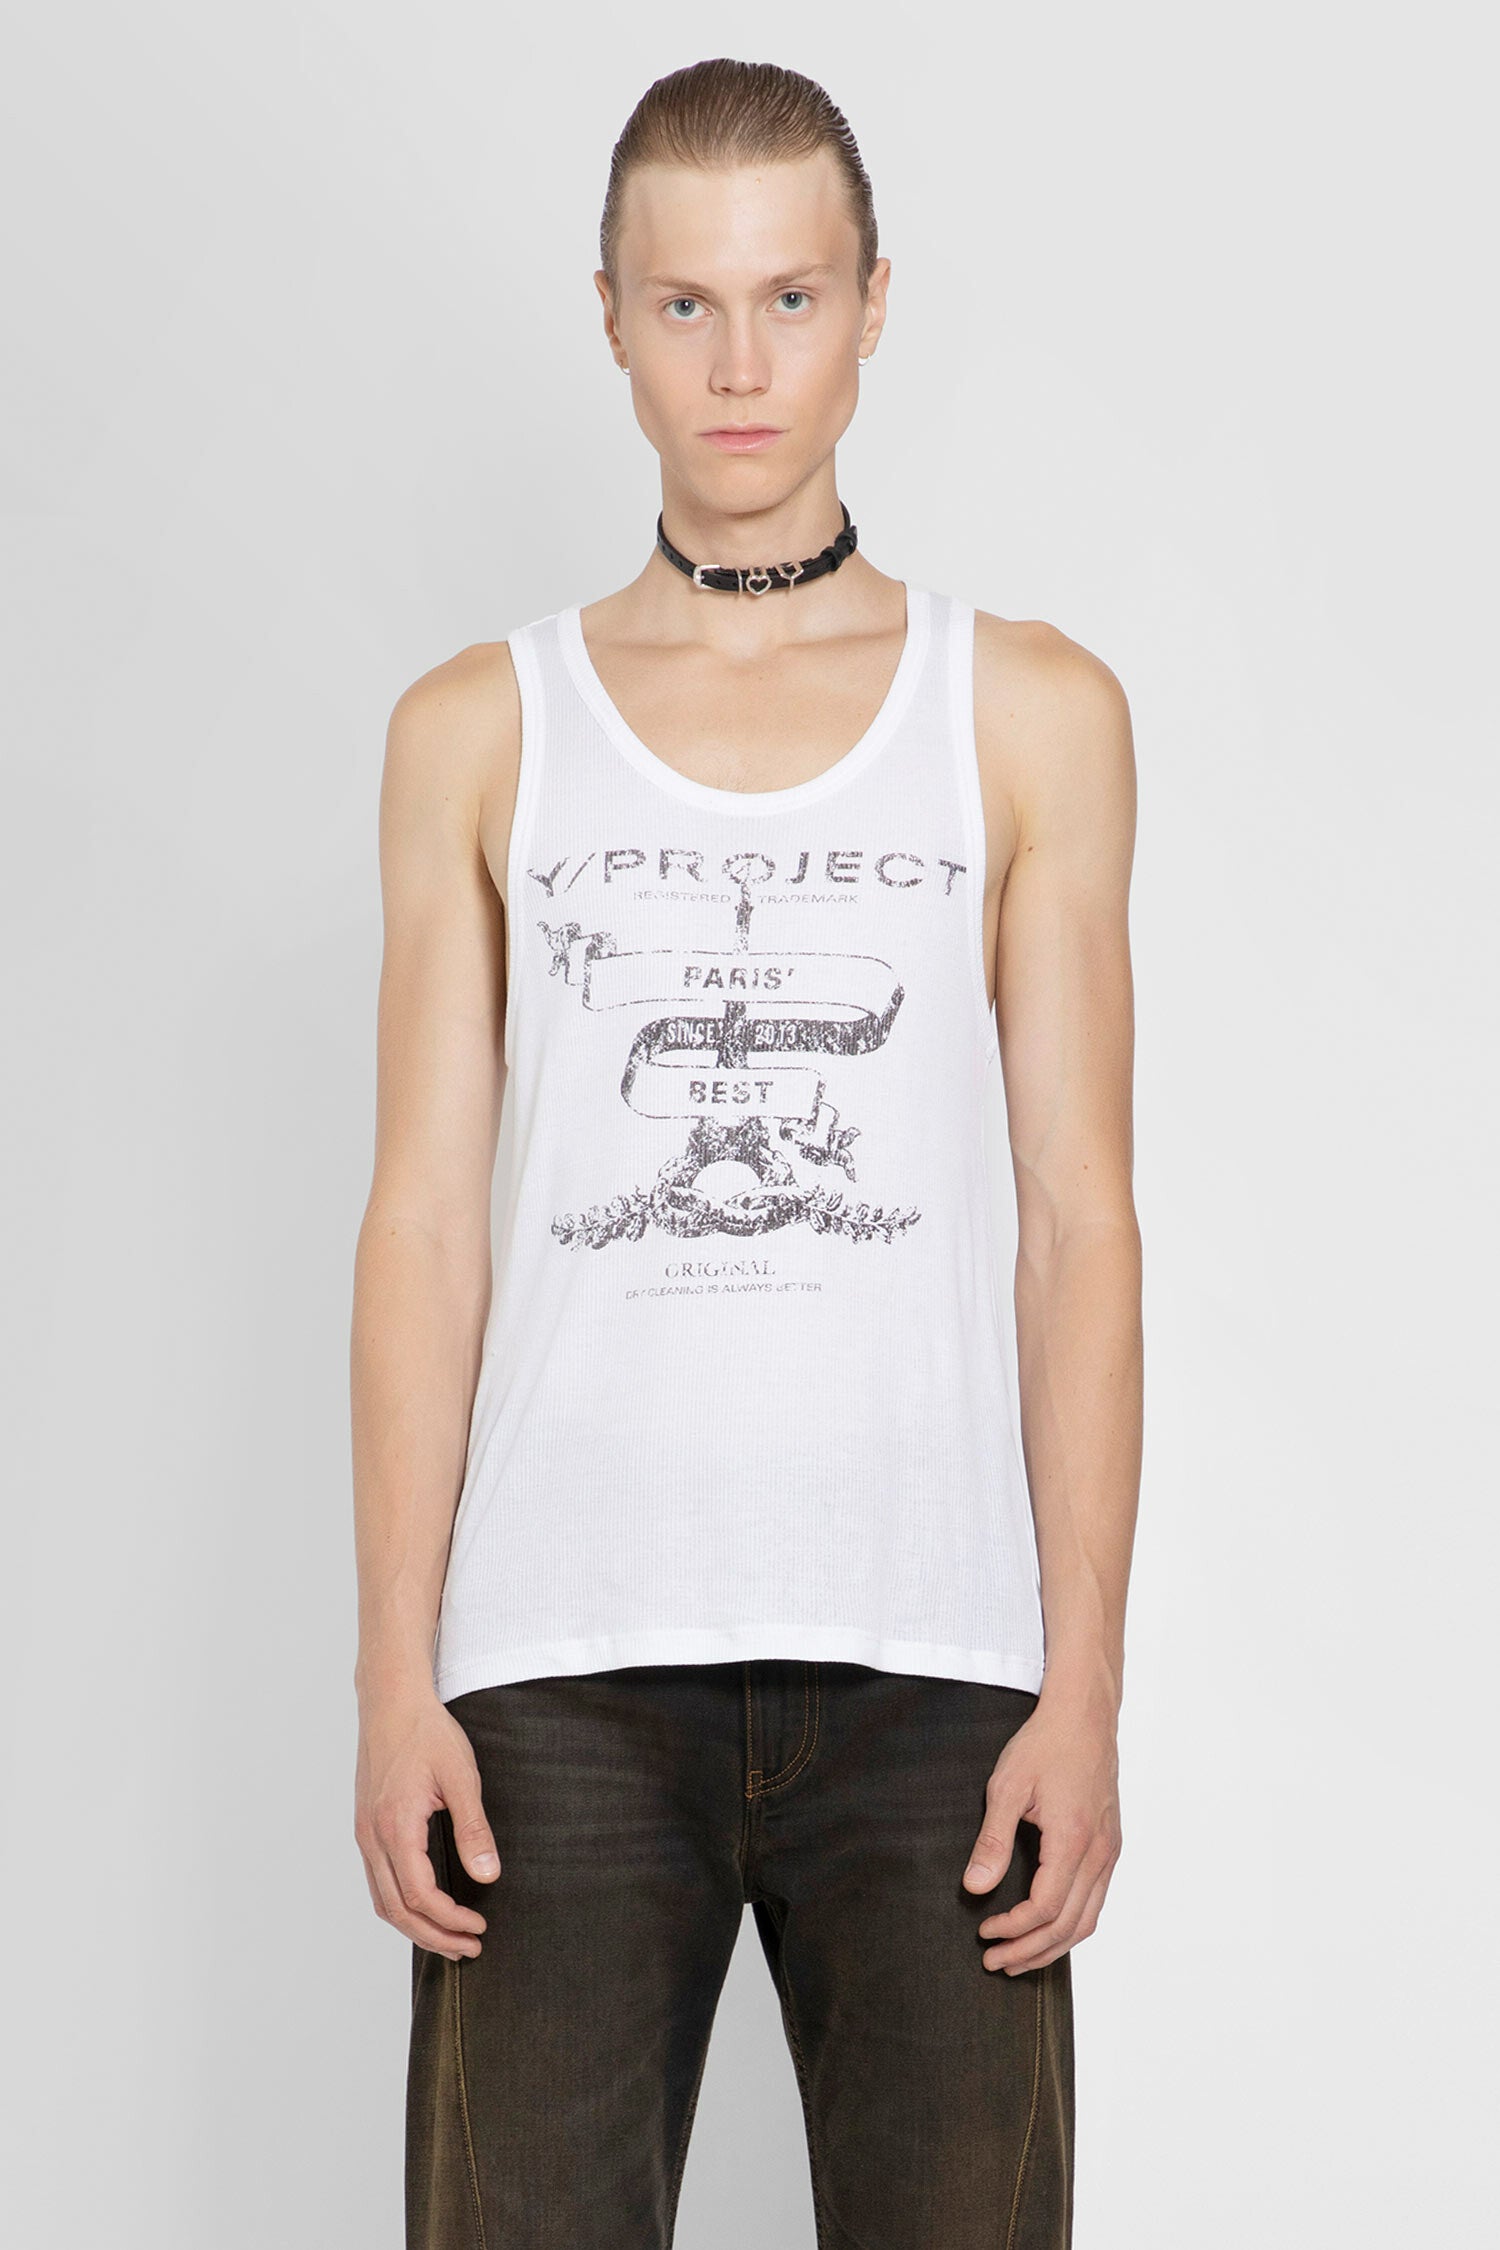 Y/PROJECT MAN WHITE TANK TOPS